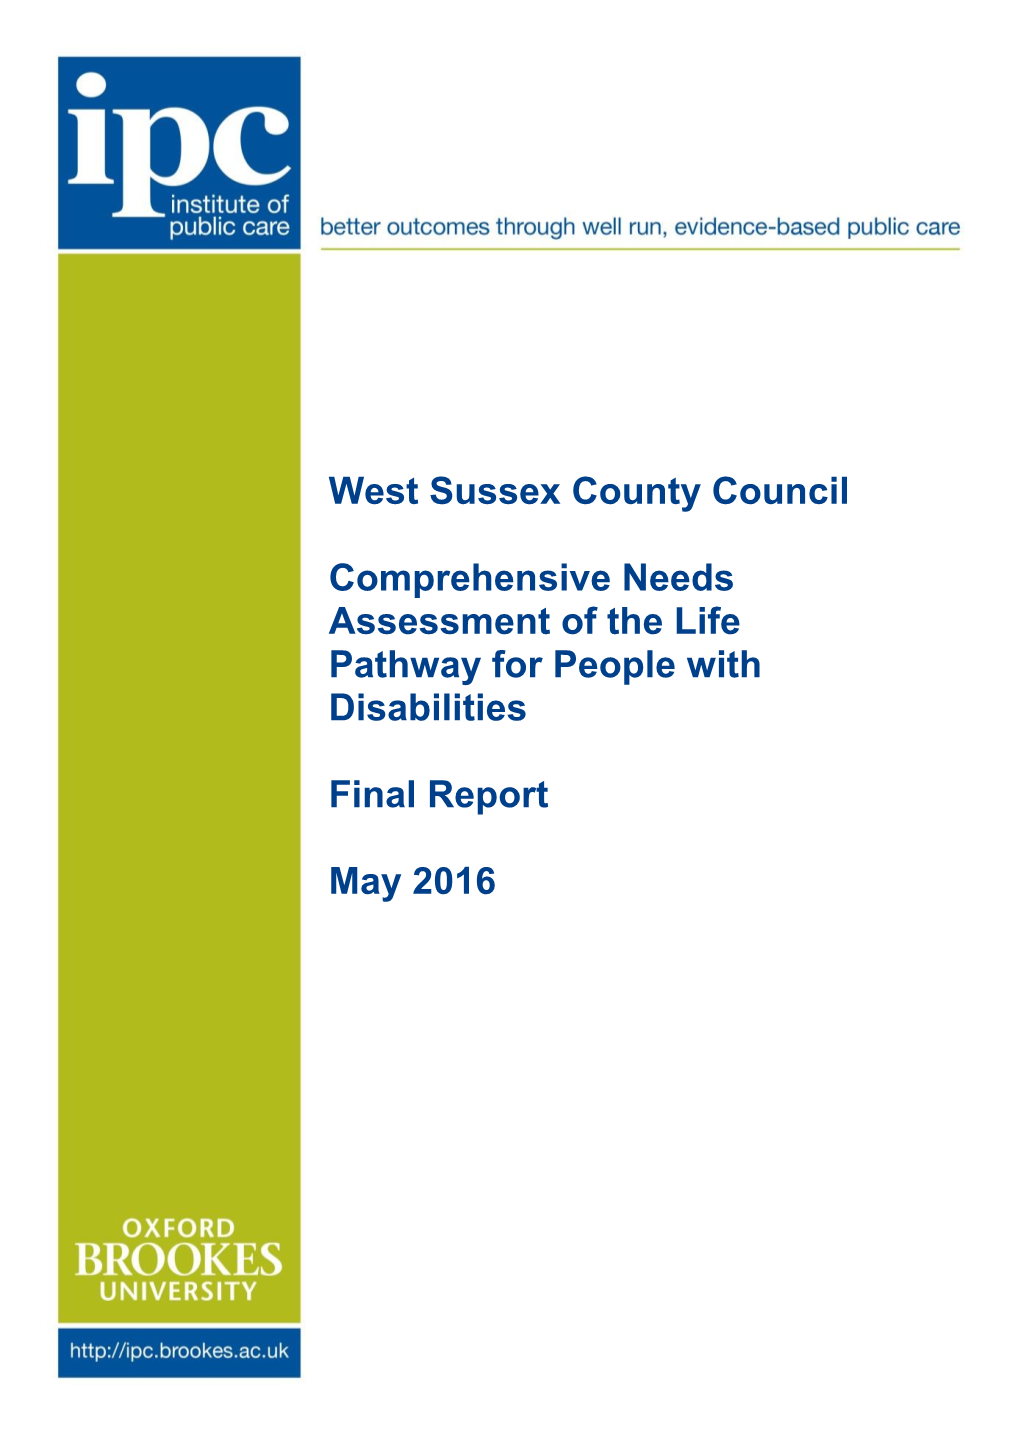 West Sussex County Council Comprehensive Needs Assessment of the Life Pathway for People with Disabilities Final Report May 2016